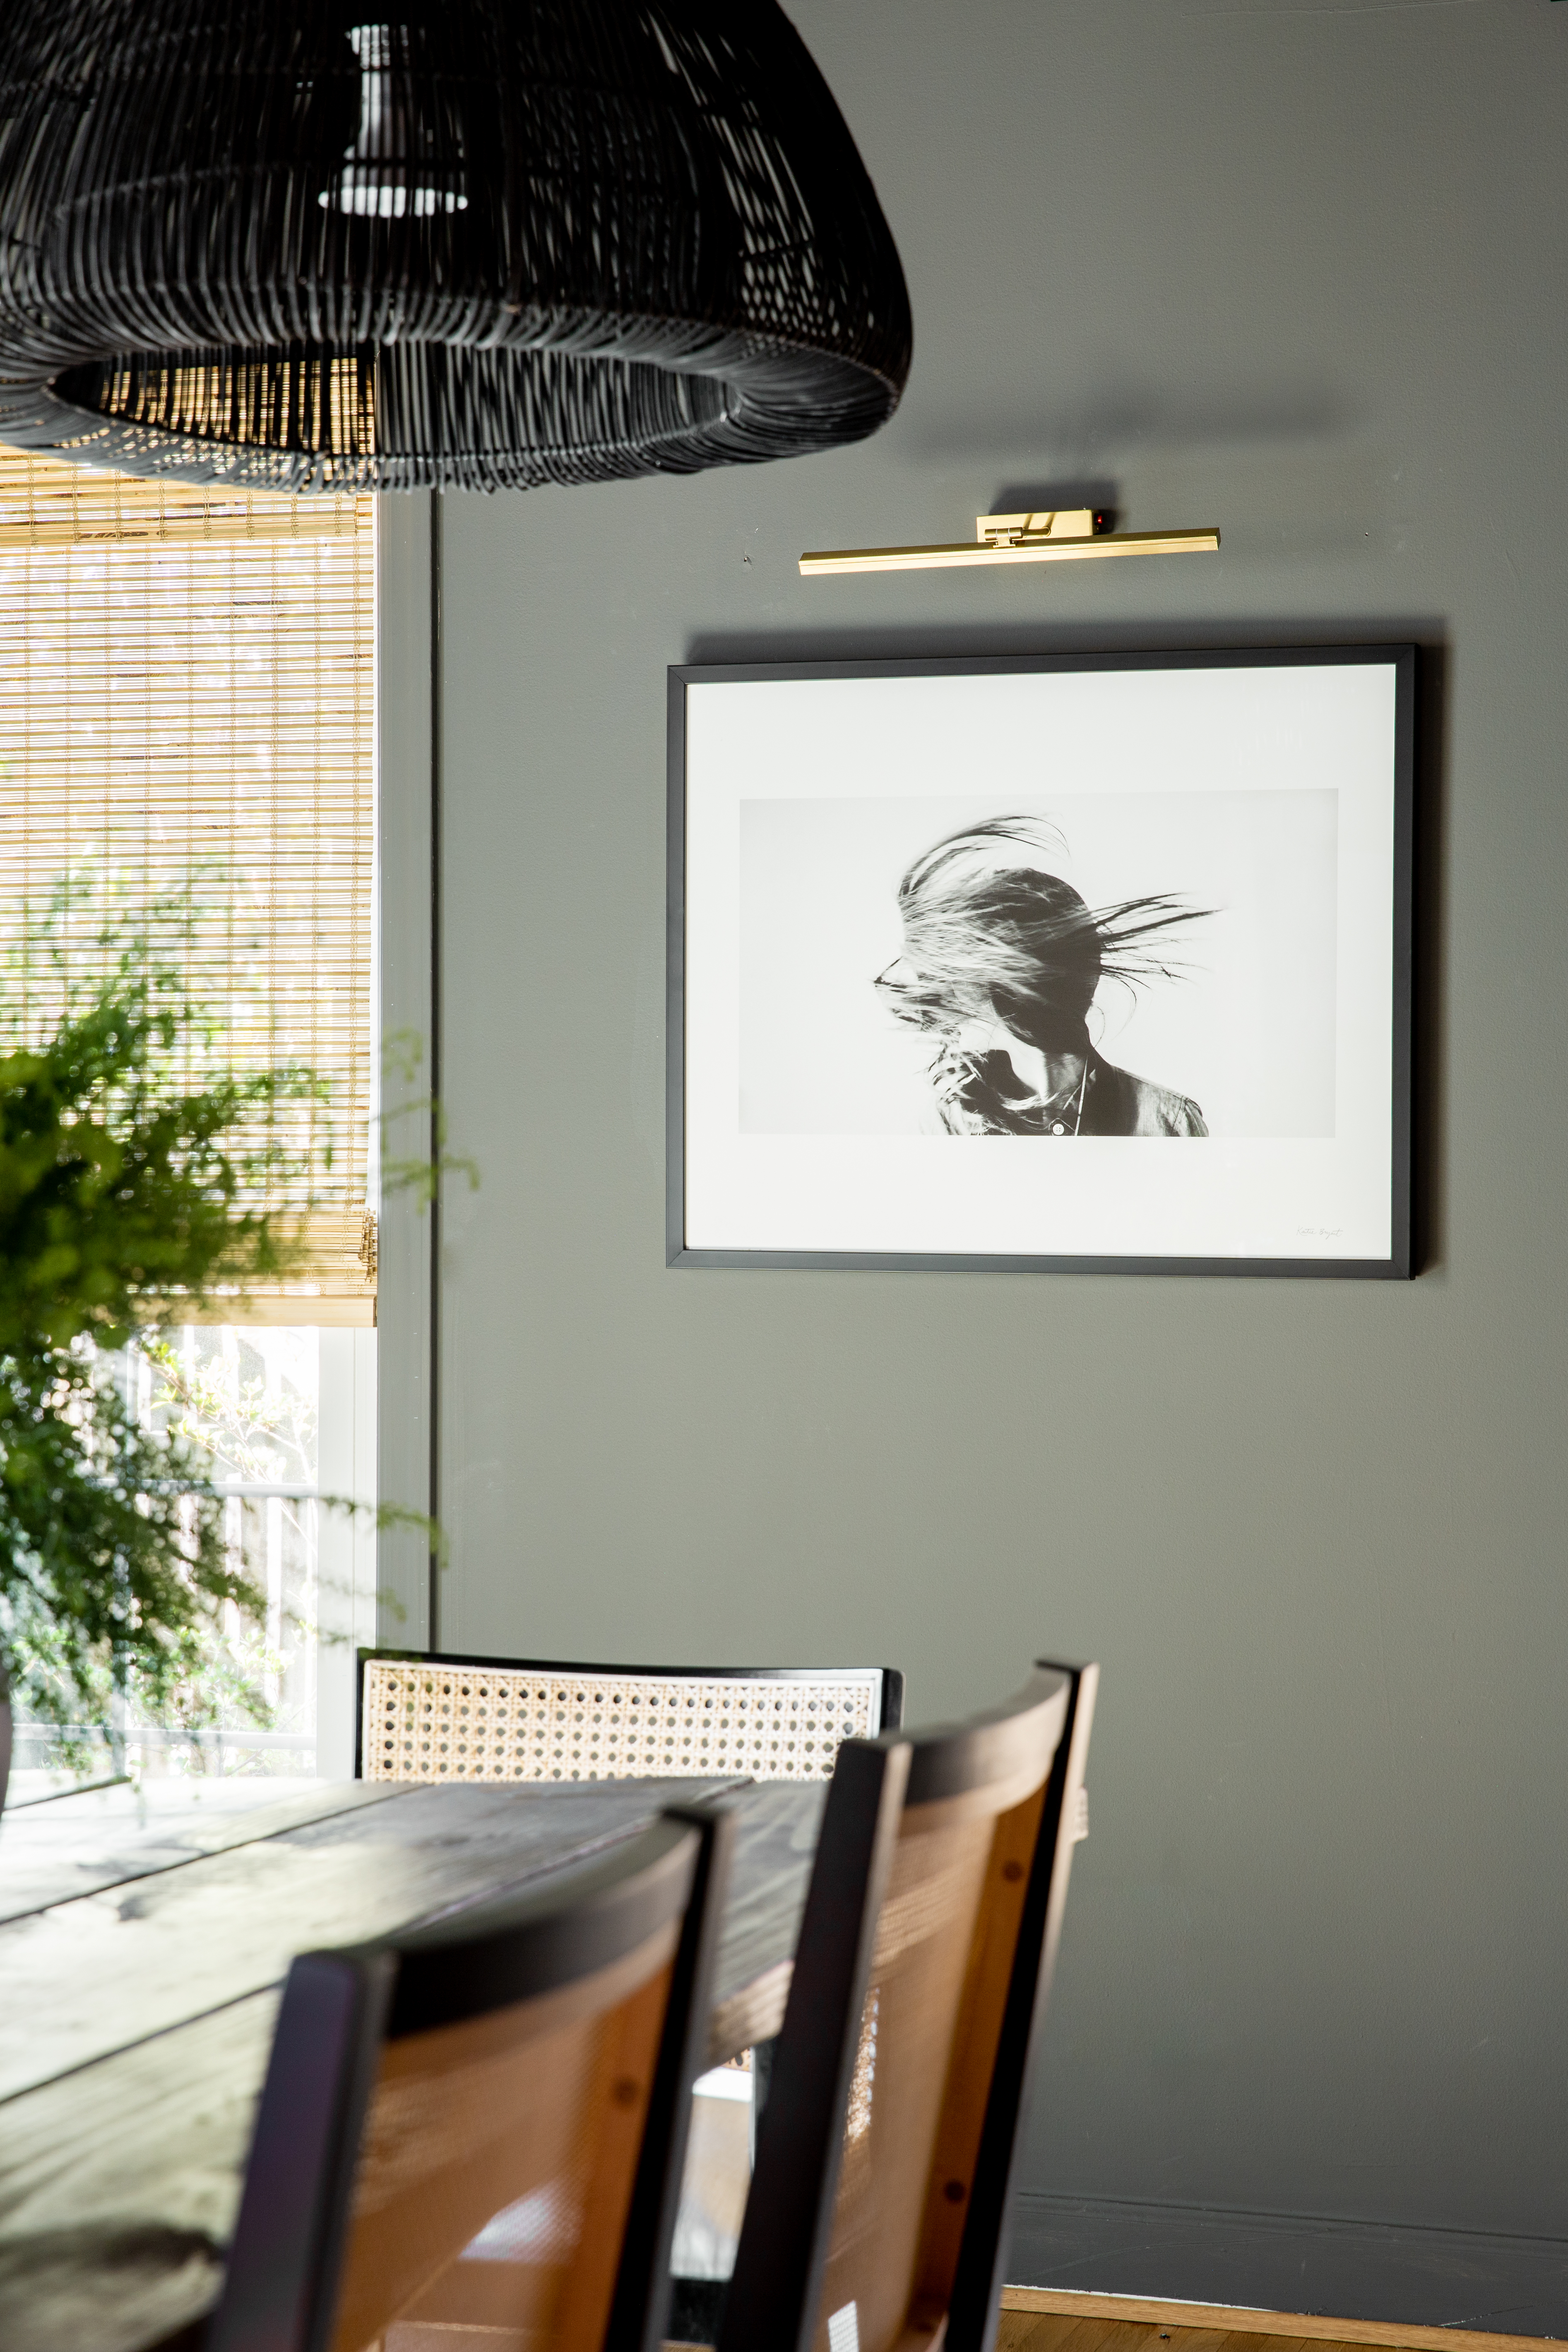 Dining Room Before and After: A Moody, Transitional Dining Space